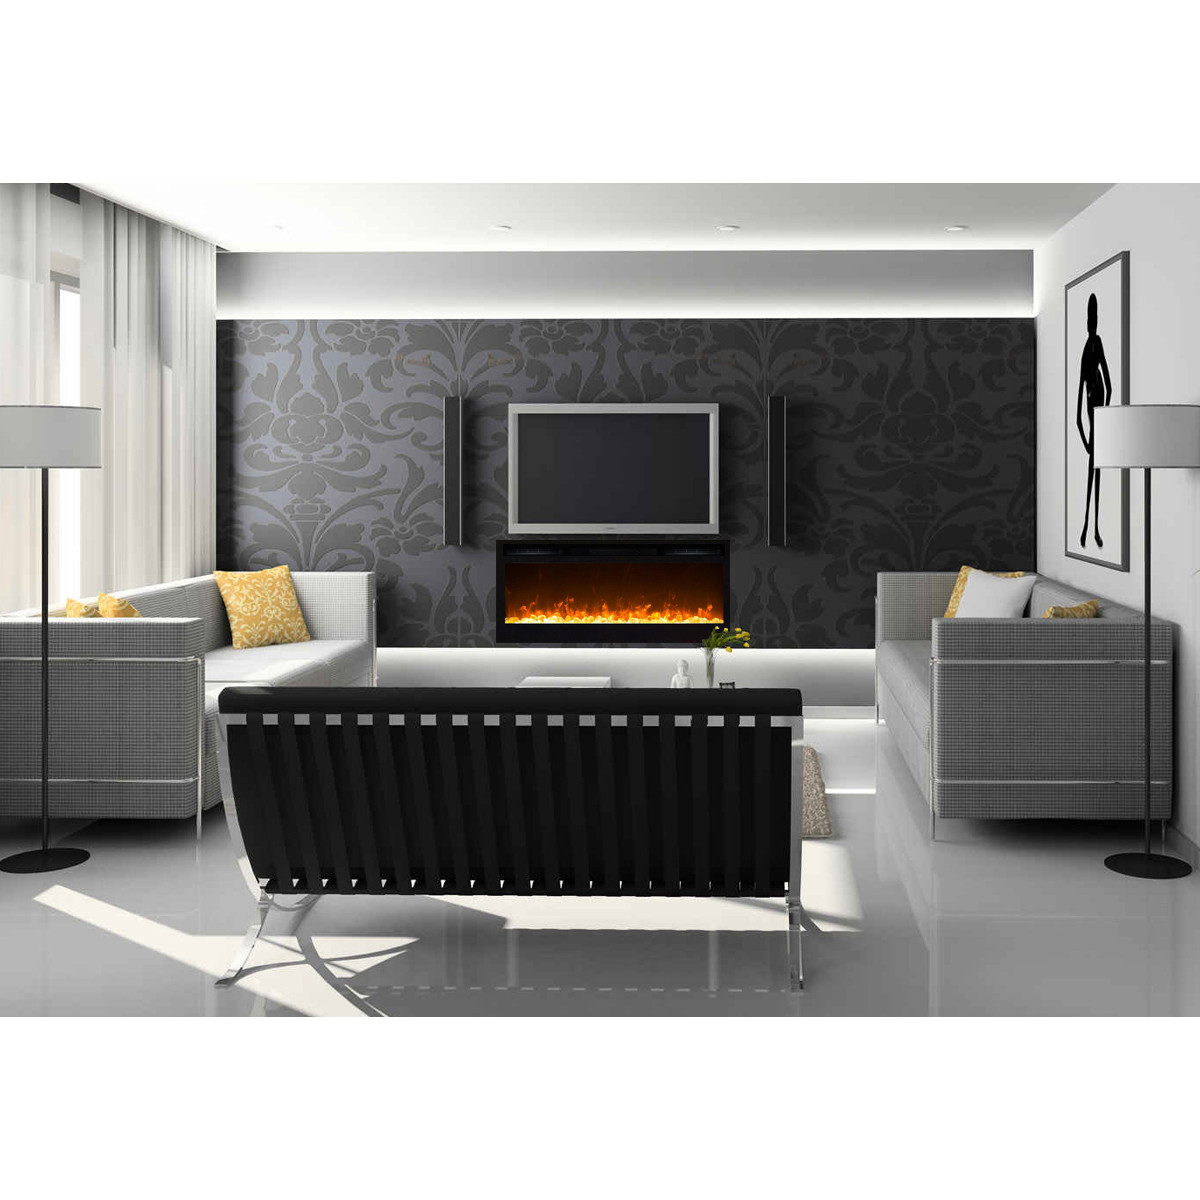 Recessed Wall Mount Electric Fireplace
 Moda Flame 36 Inch Cynergy Crystal Built In Recessed Wall